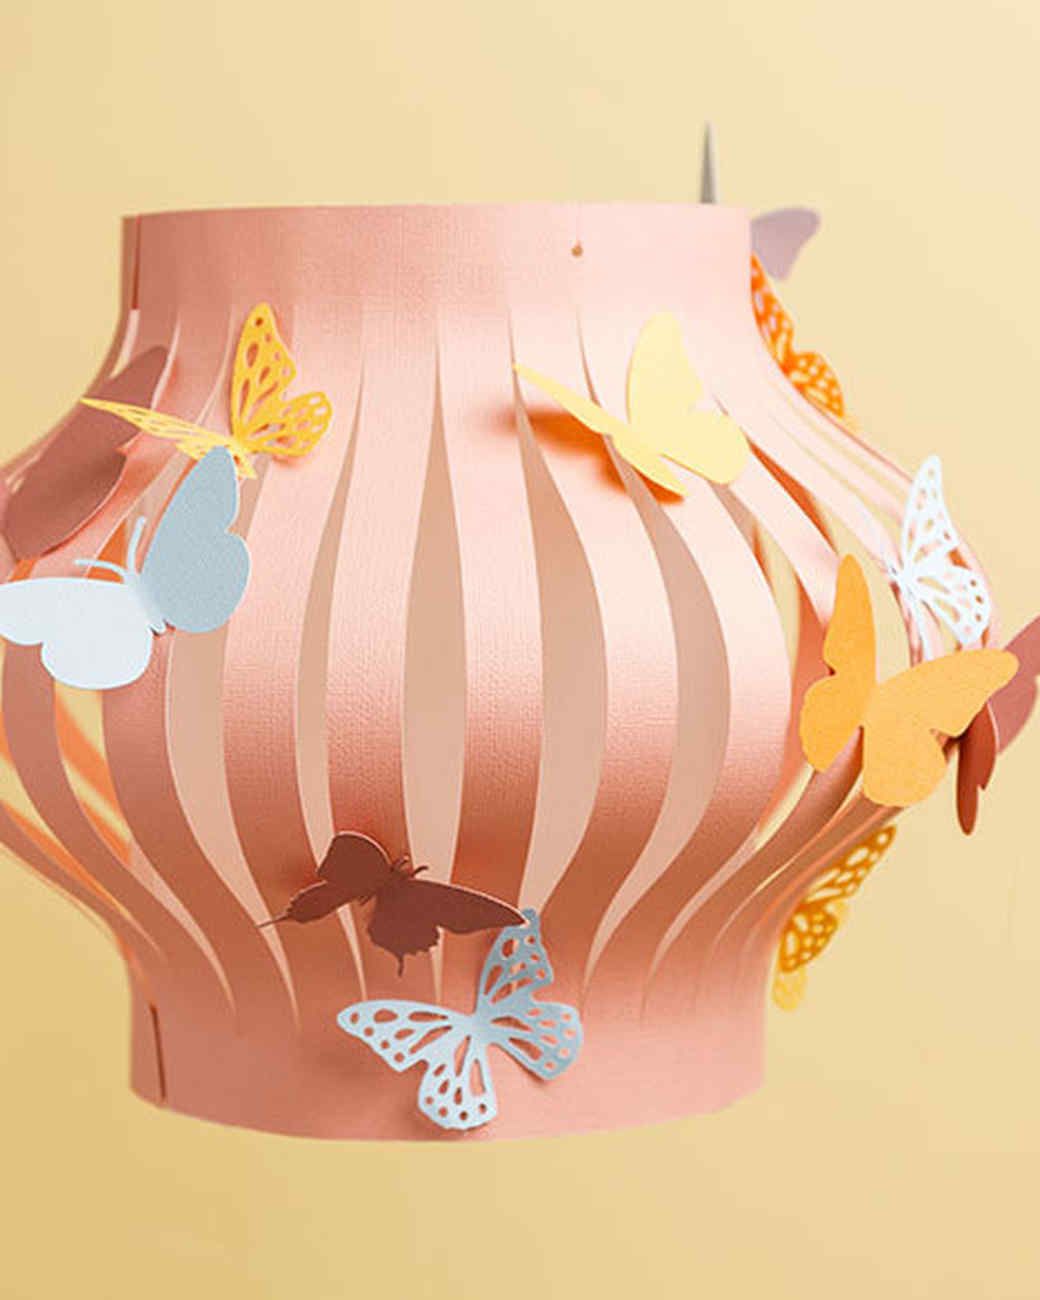 History of the Butterfly Paper Lantern